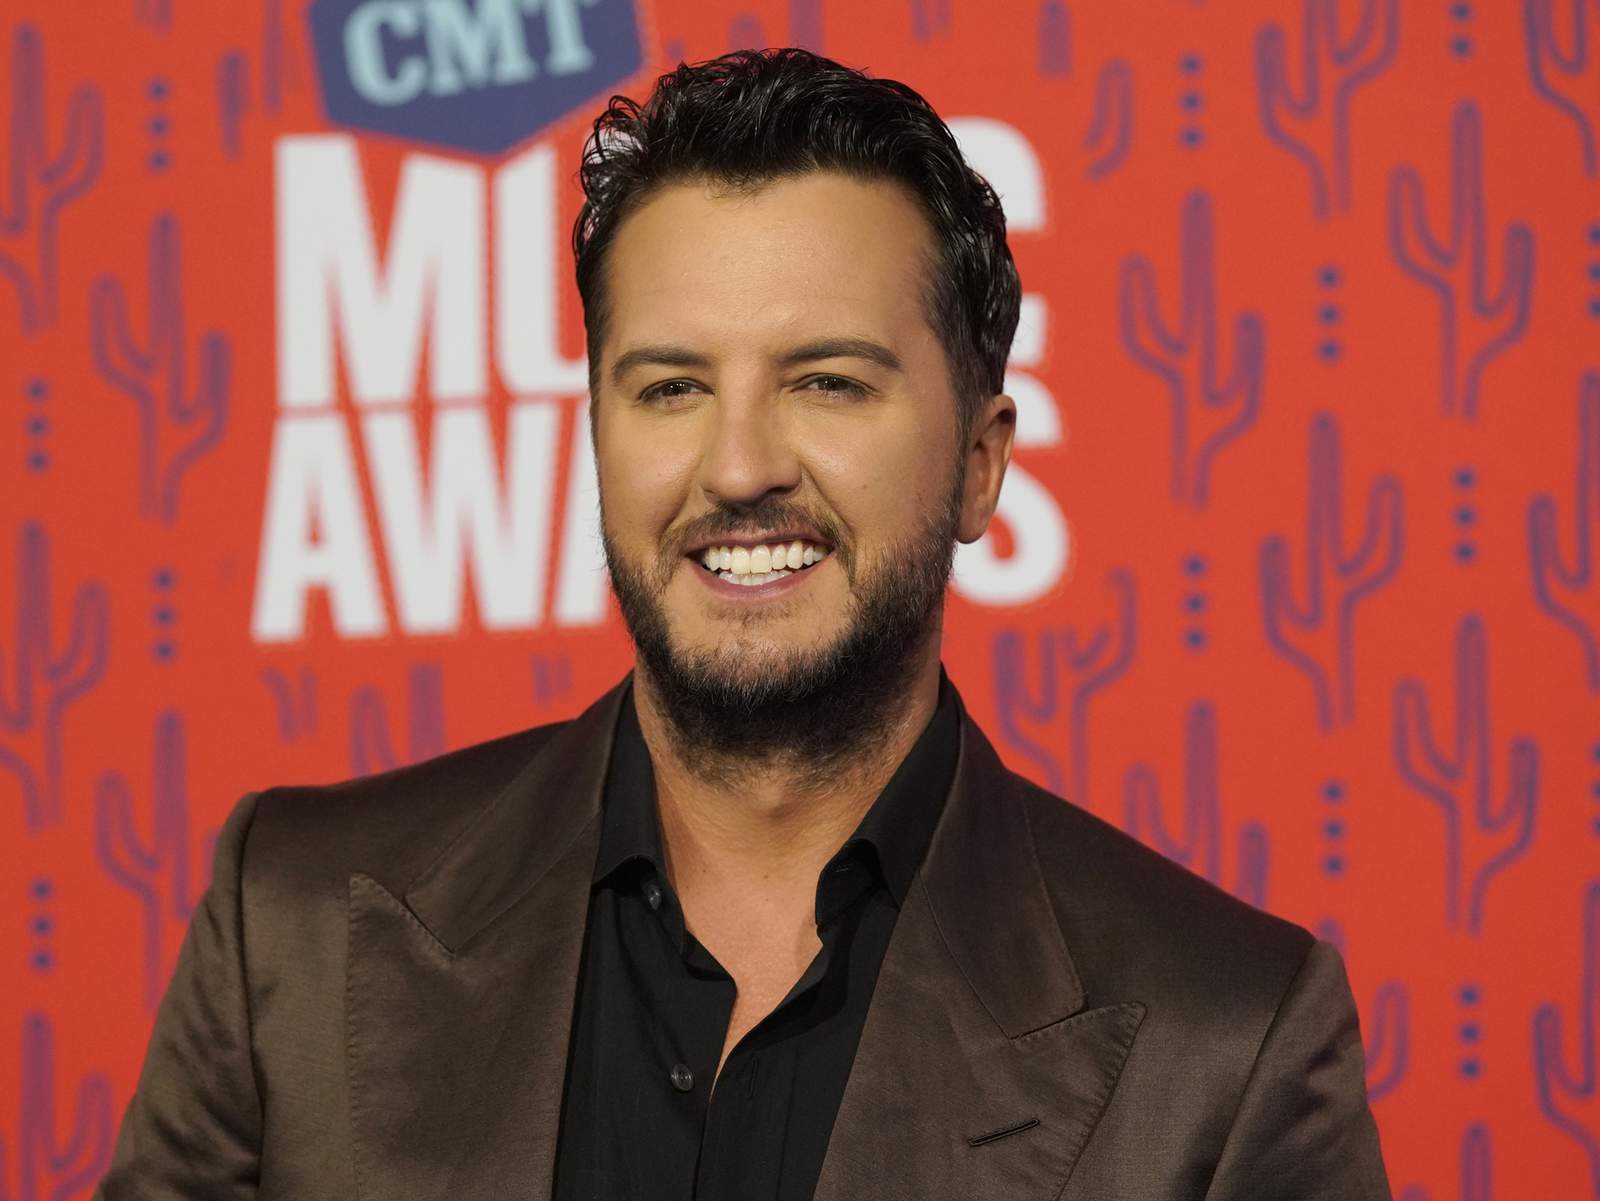 Luke Bryan tests positive for COVID, sidelined from ‘Idol’